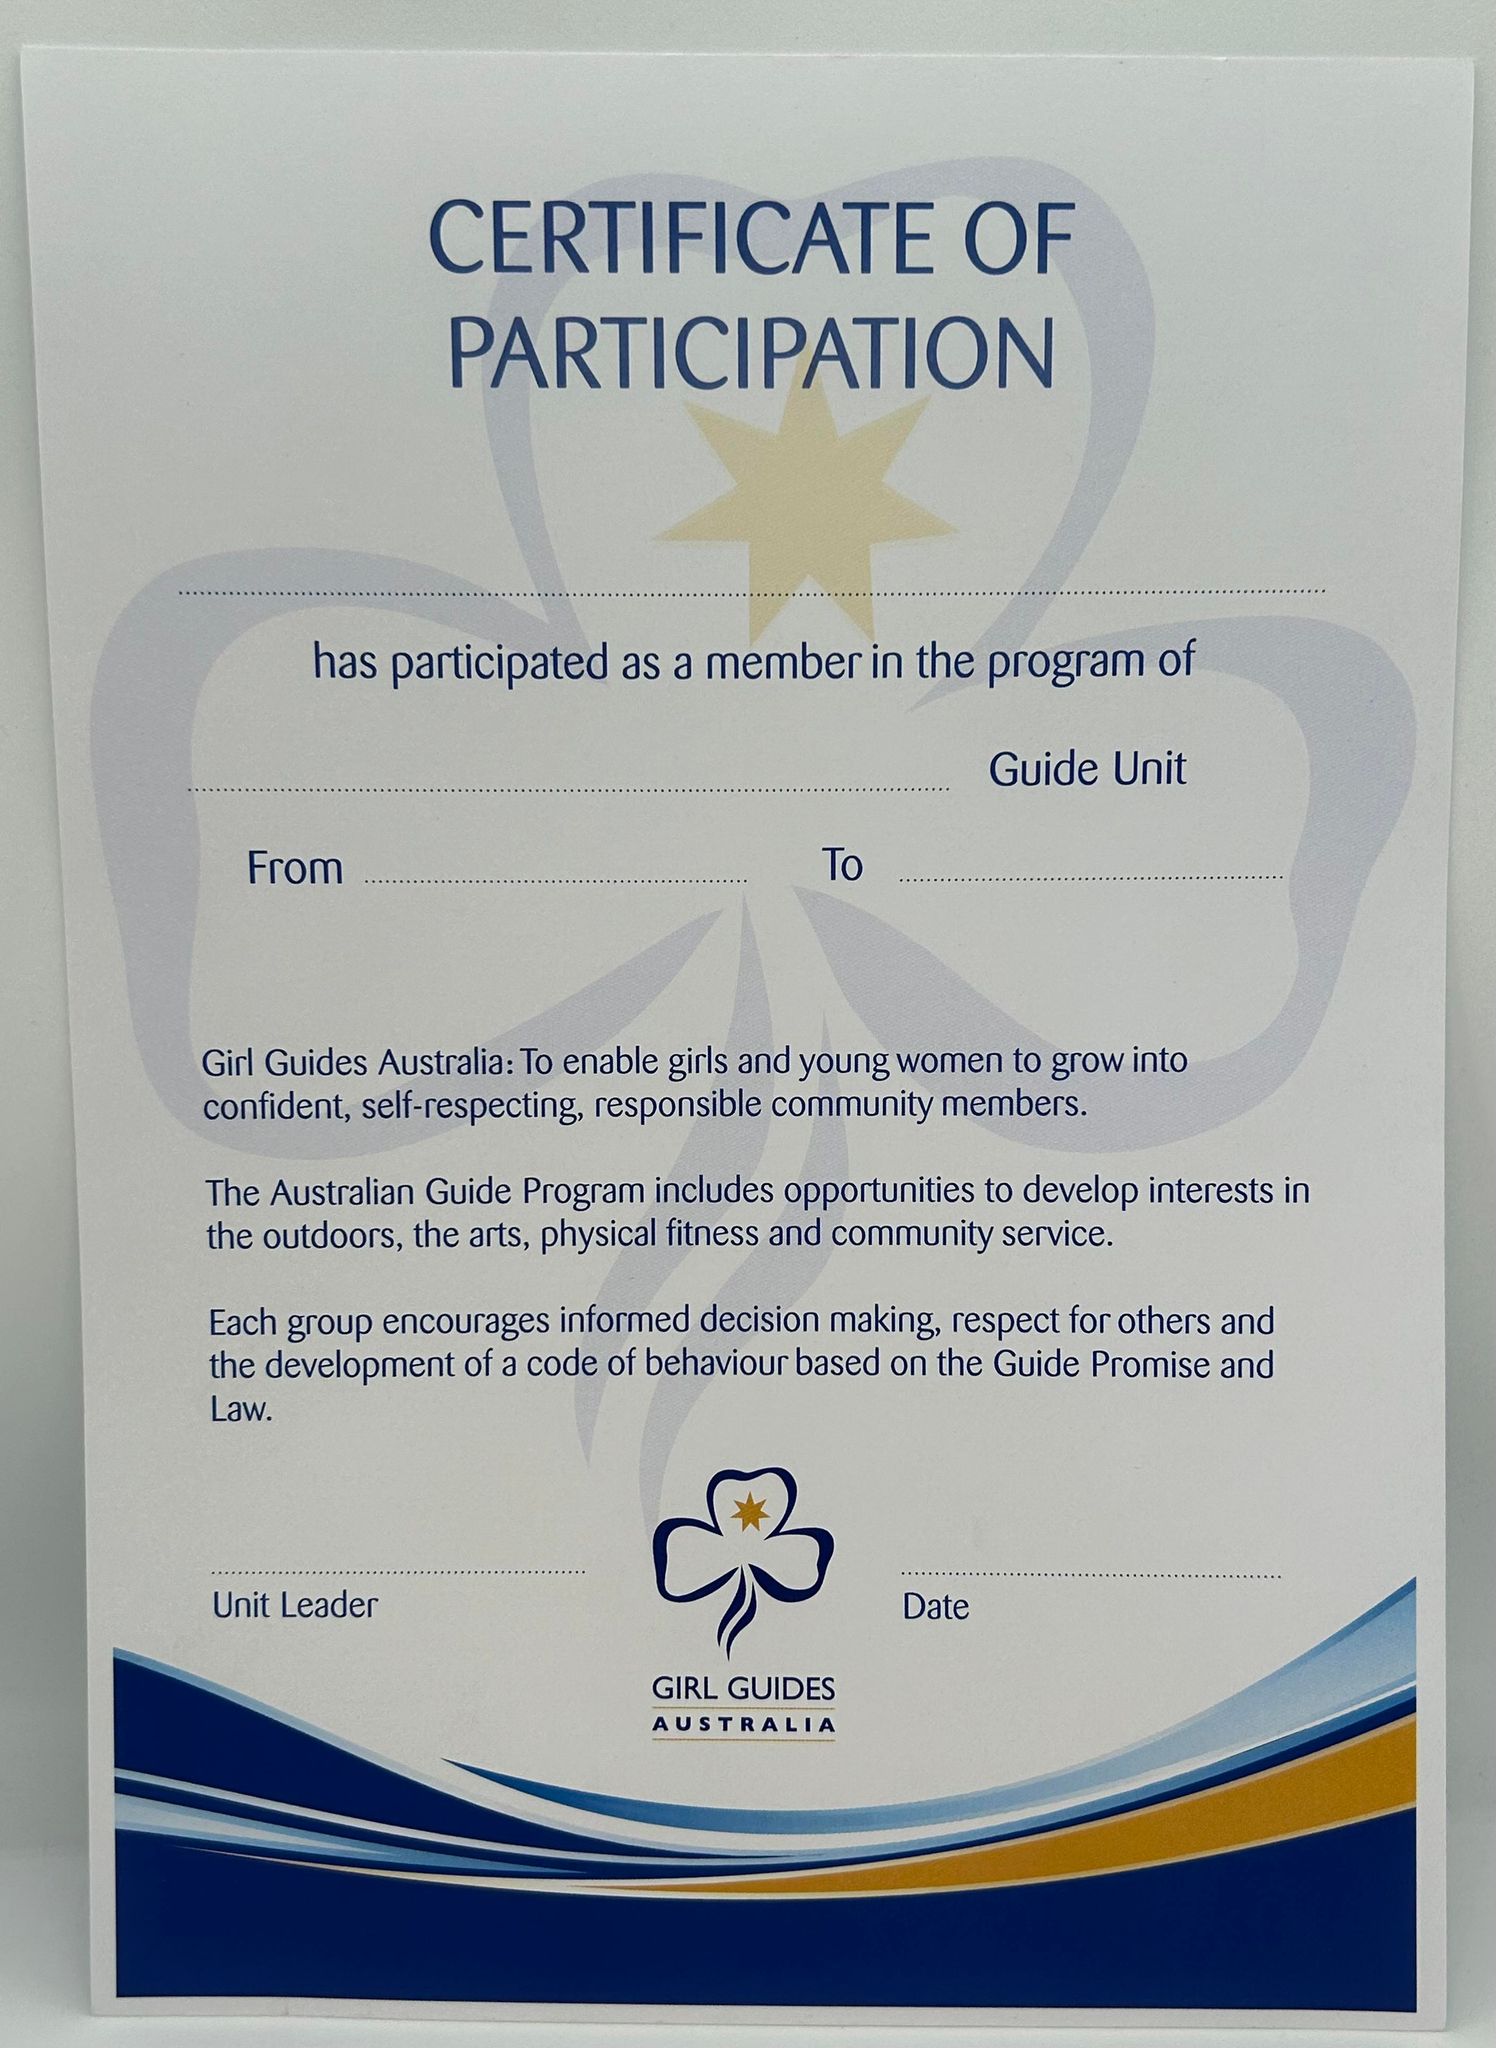 an A4 certificate to say that someone has participated in the program it has blue swirls and a large watermark trefoil